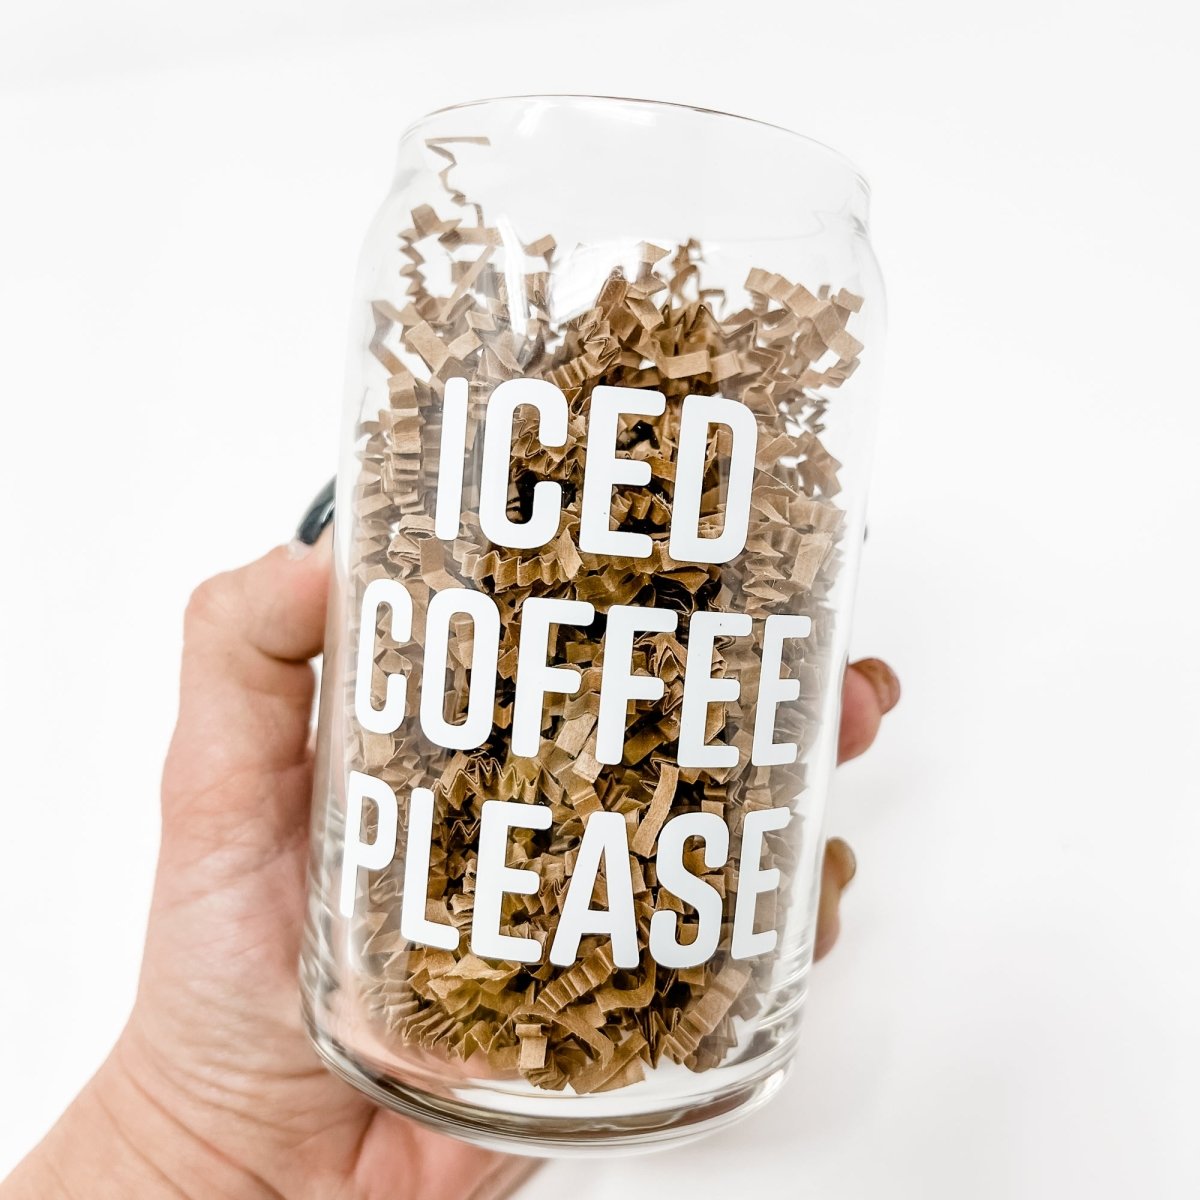 16 oz Beer Can Glass | Iced Coffee Please - sonder and wolf